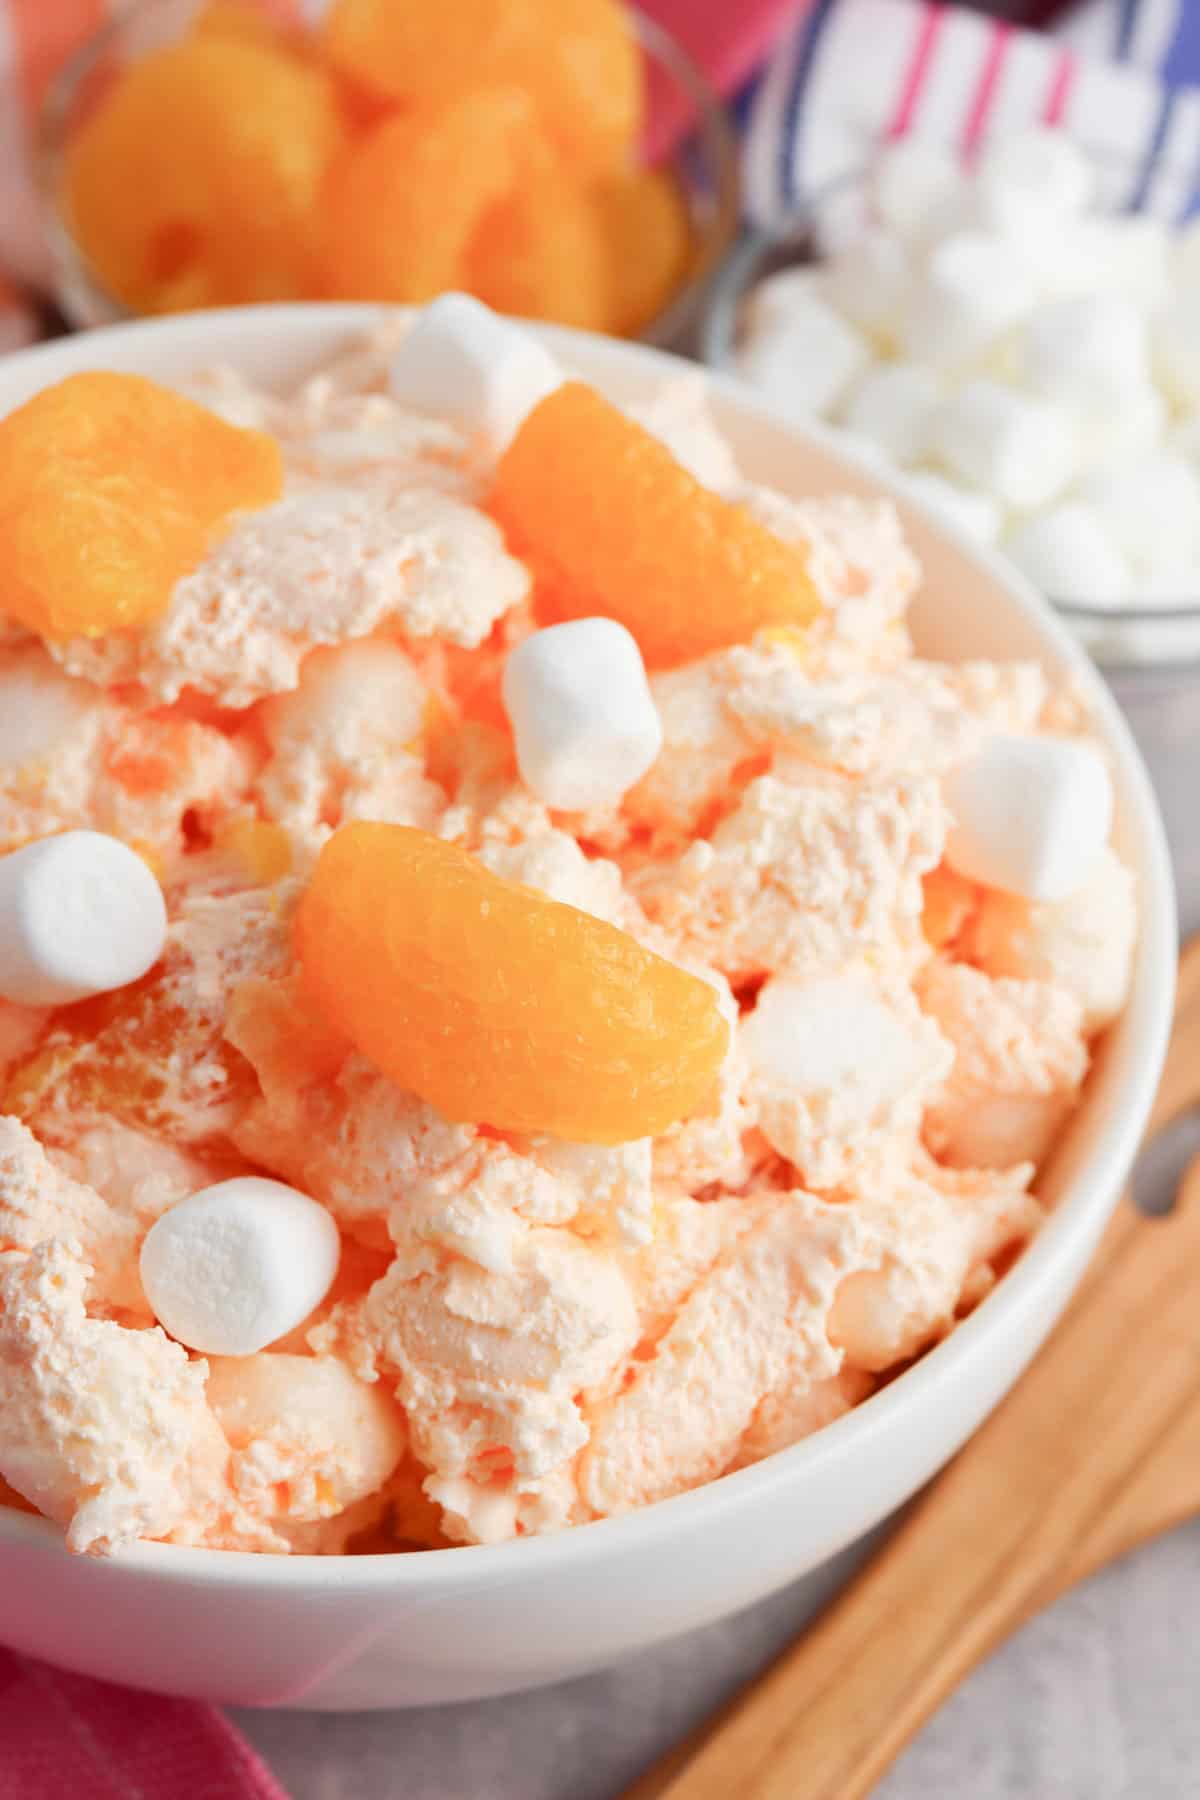 Bowl of orange creamsicle salad with wooden serving spoon.